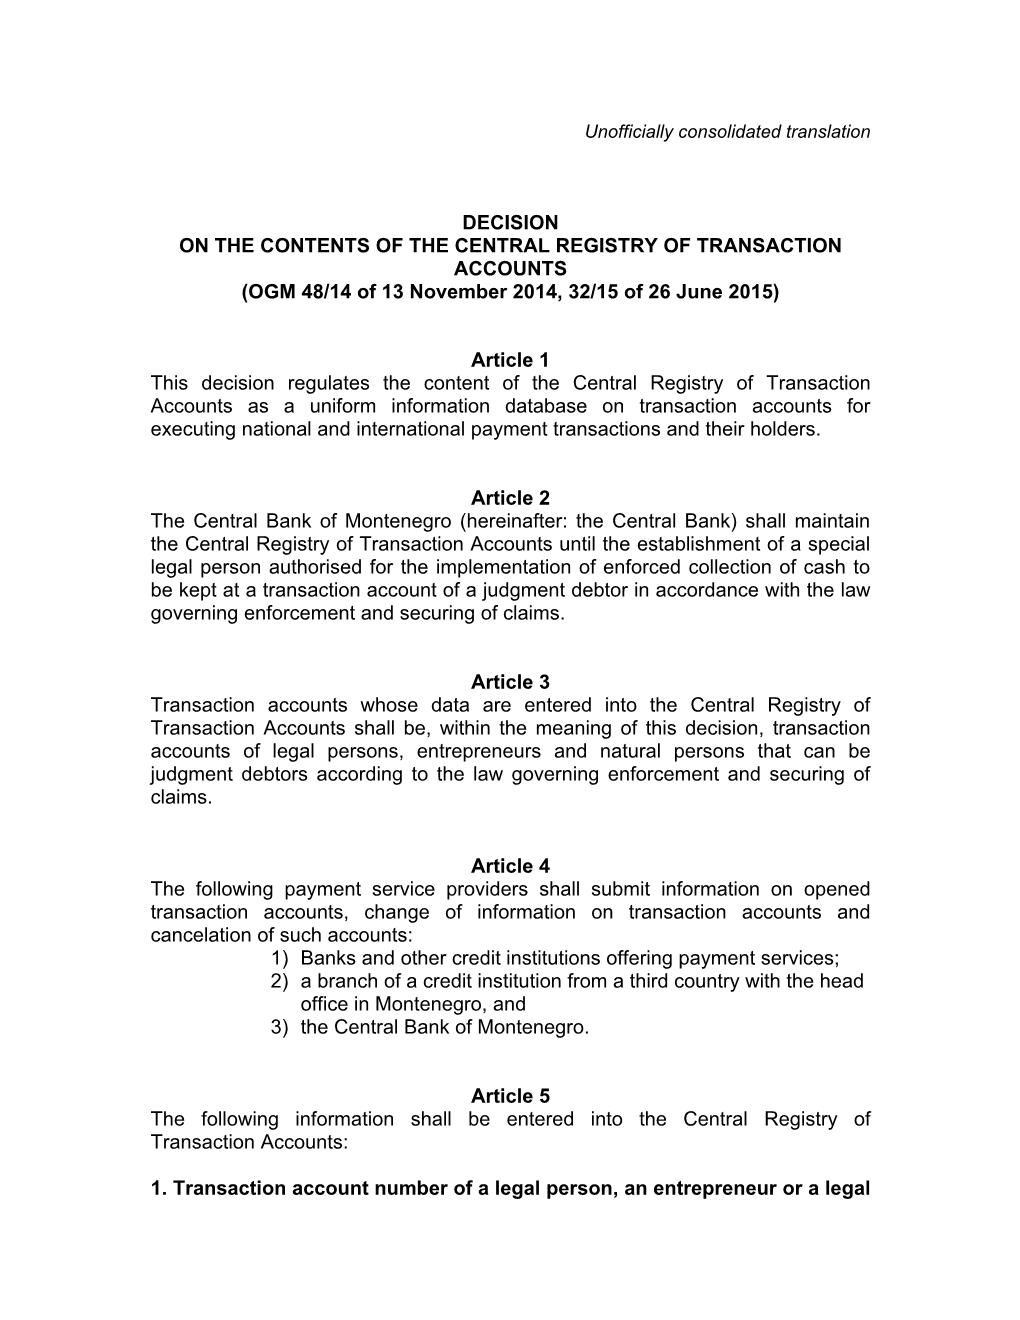 DECISION on the CONTENTS of the CENTRAL REGISTRY of TRANSACTION ACCOUNTS (OGM 48/14 of 13 November 2014, 32/15 of 26 June 2015)